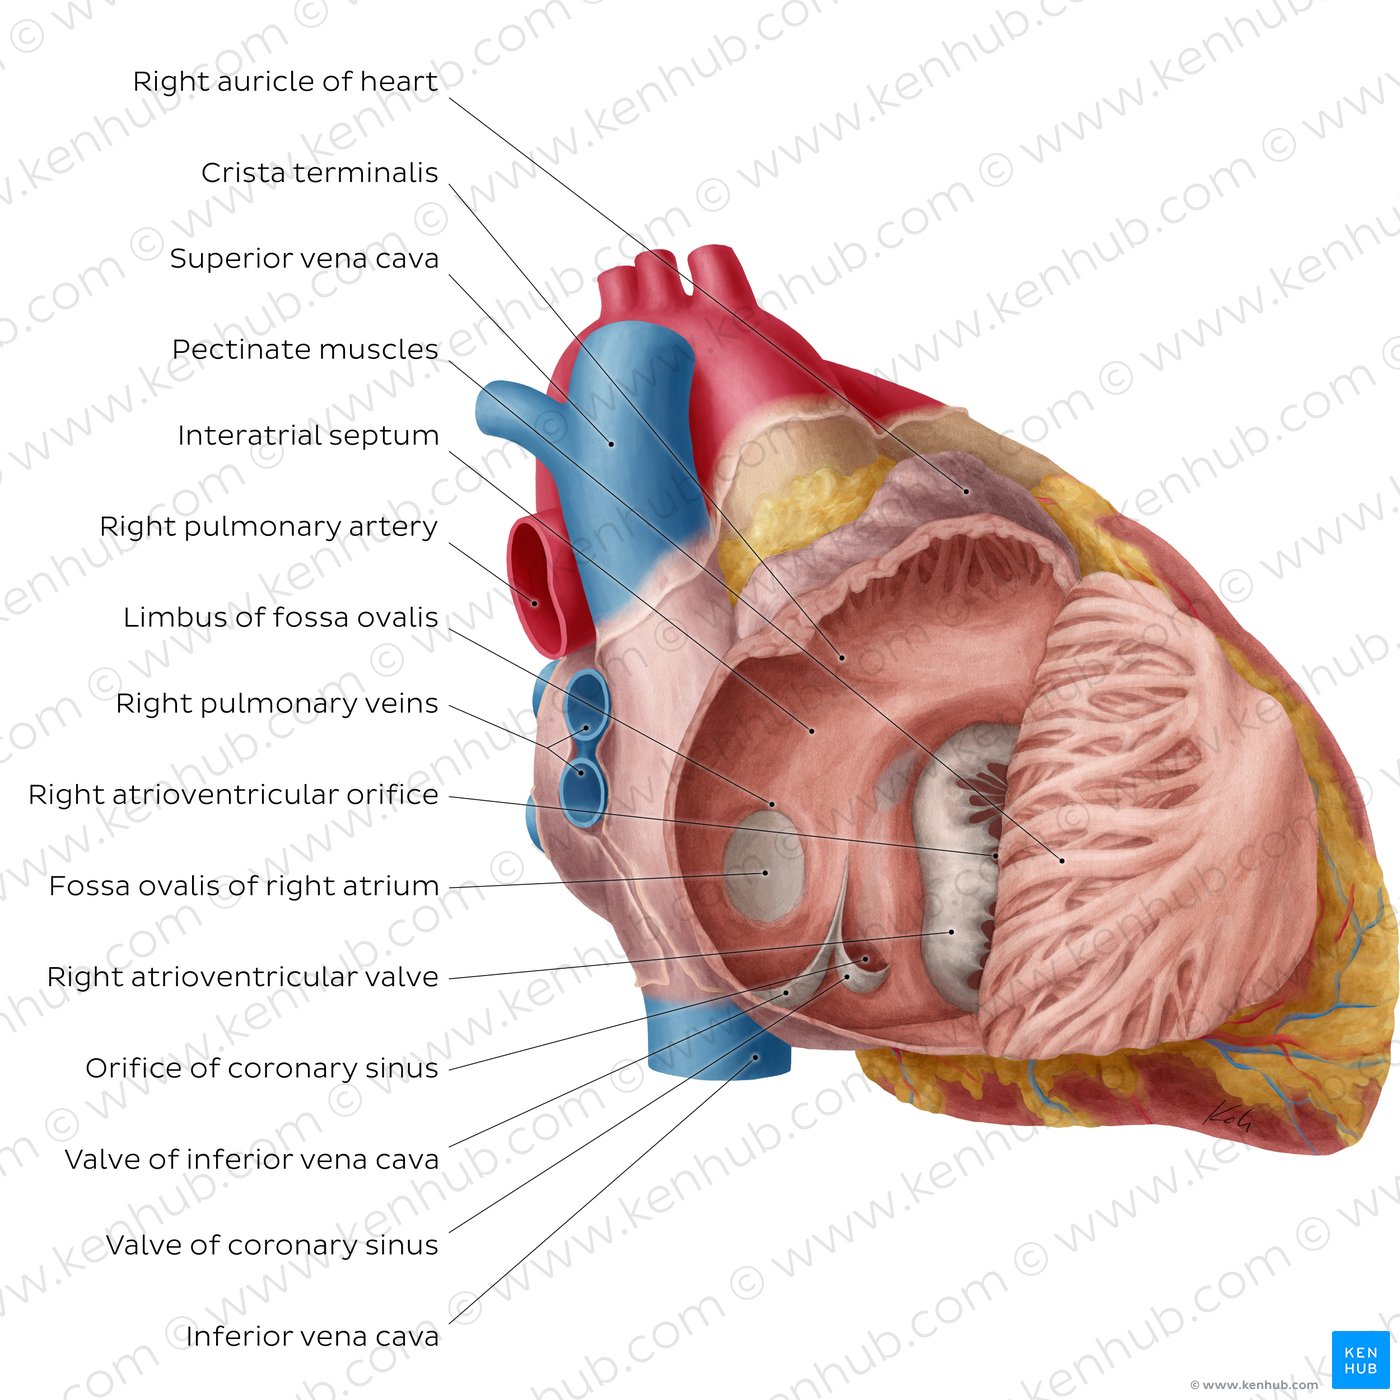 Right atrium and ventricle of the heart (labeled)